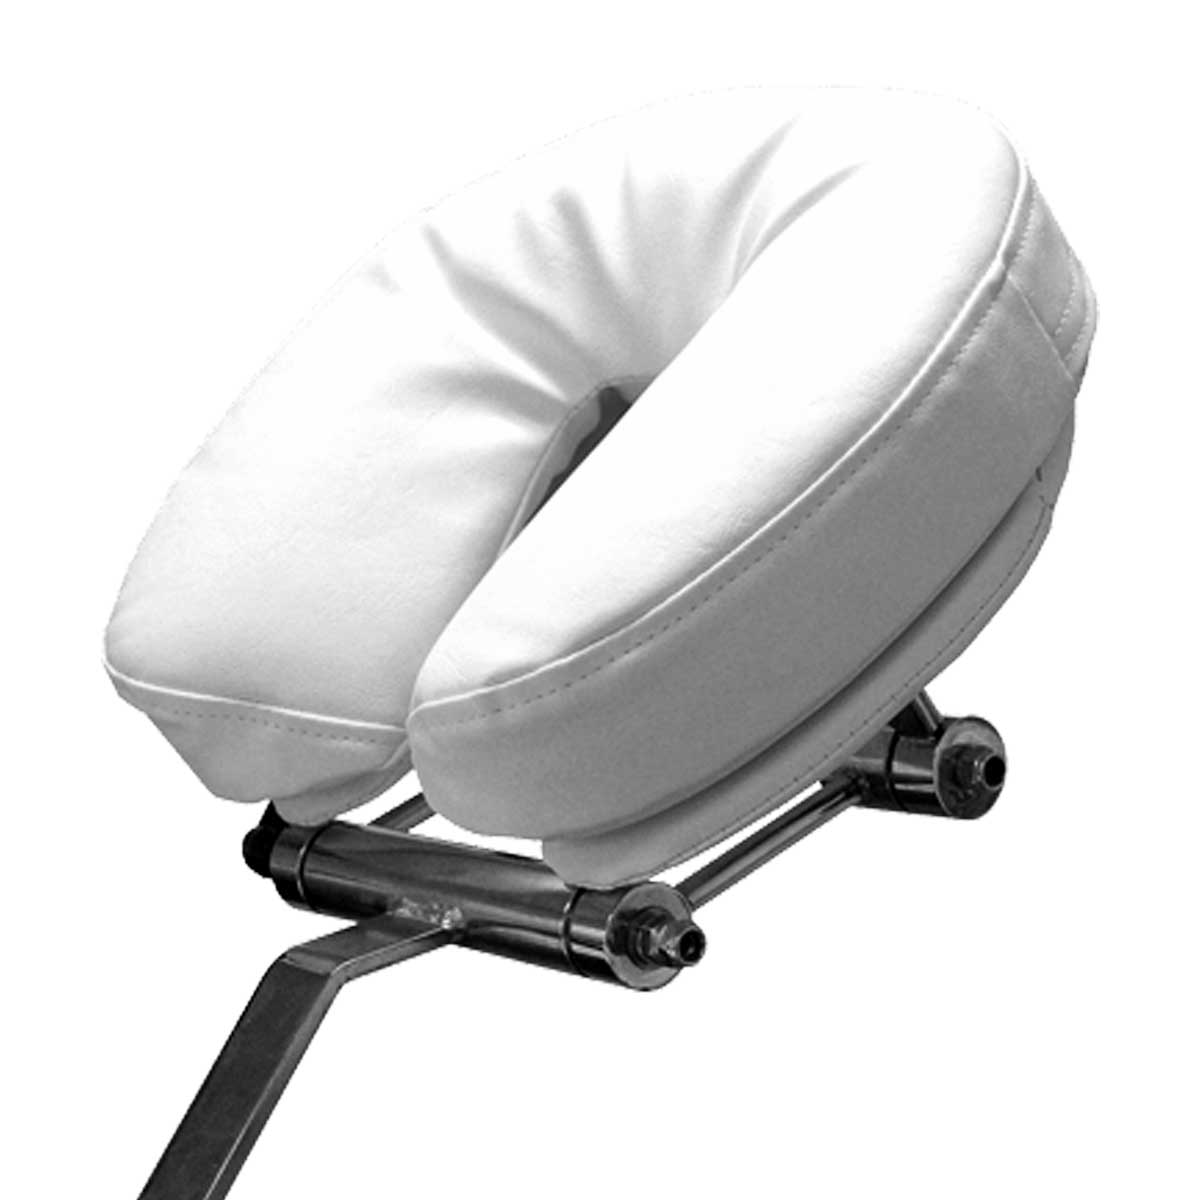 Silhouet-Tone Crescent Headrest Cushion Double-Hinged 3-4 weeks for delivery